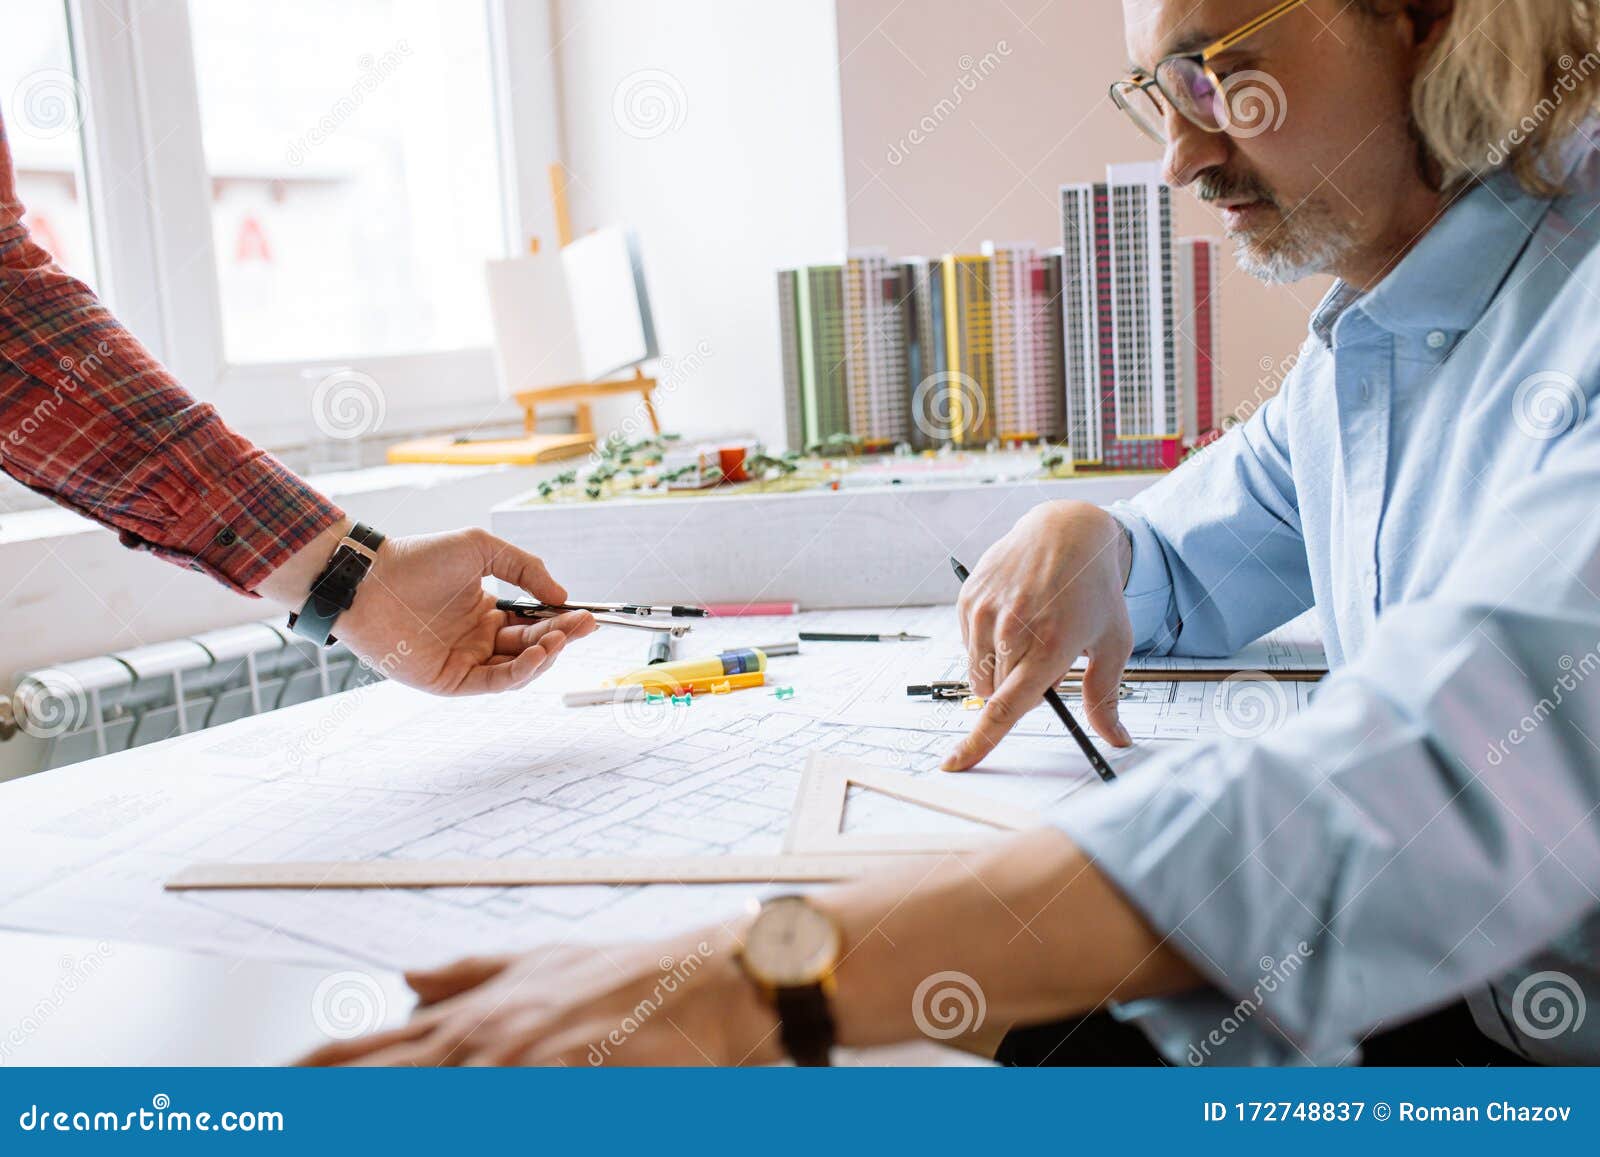 Professional Civil Engineer Working with Documents, Drawings in Office  Stock Image - Image of office, industry: 172748837